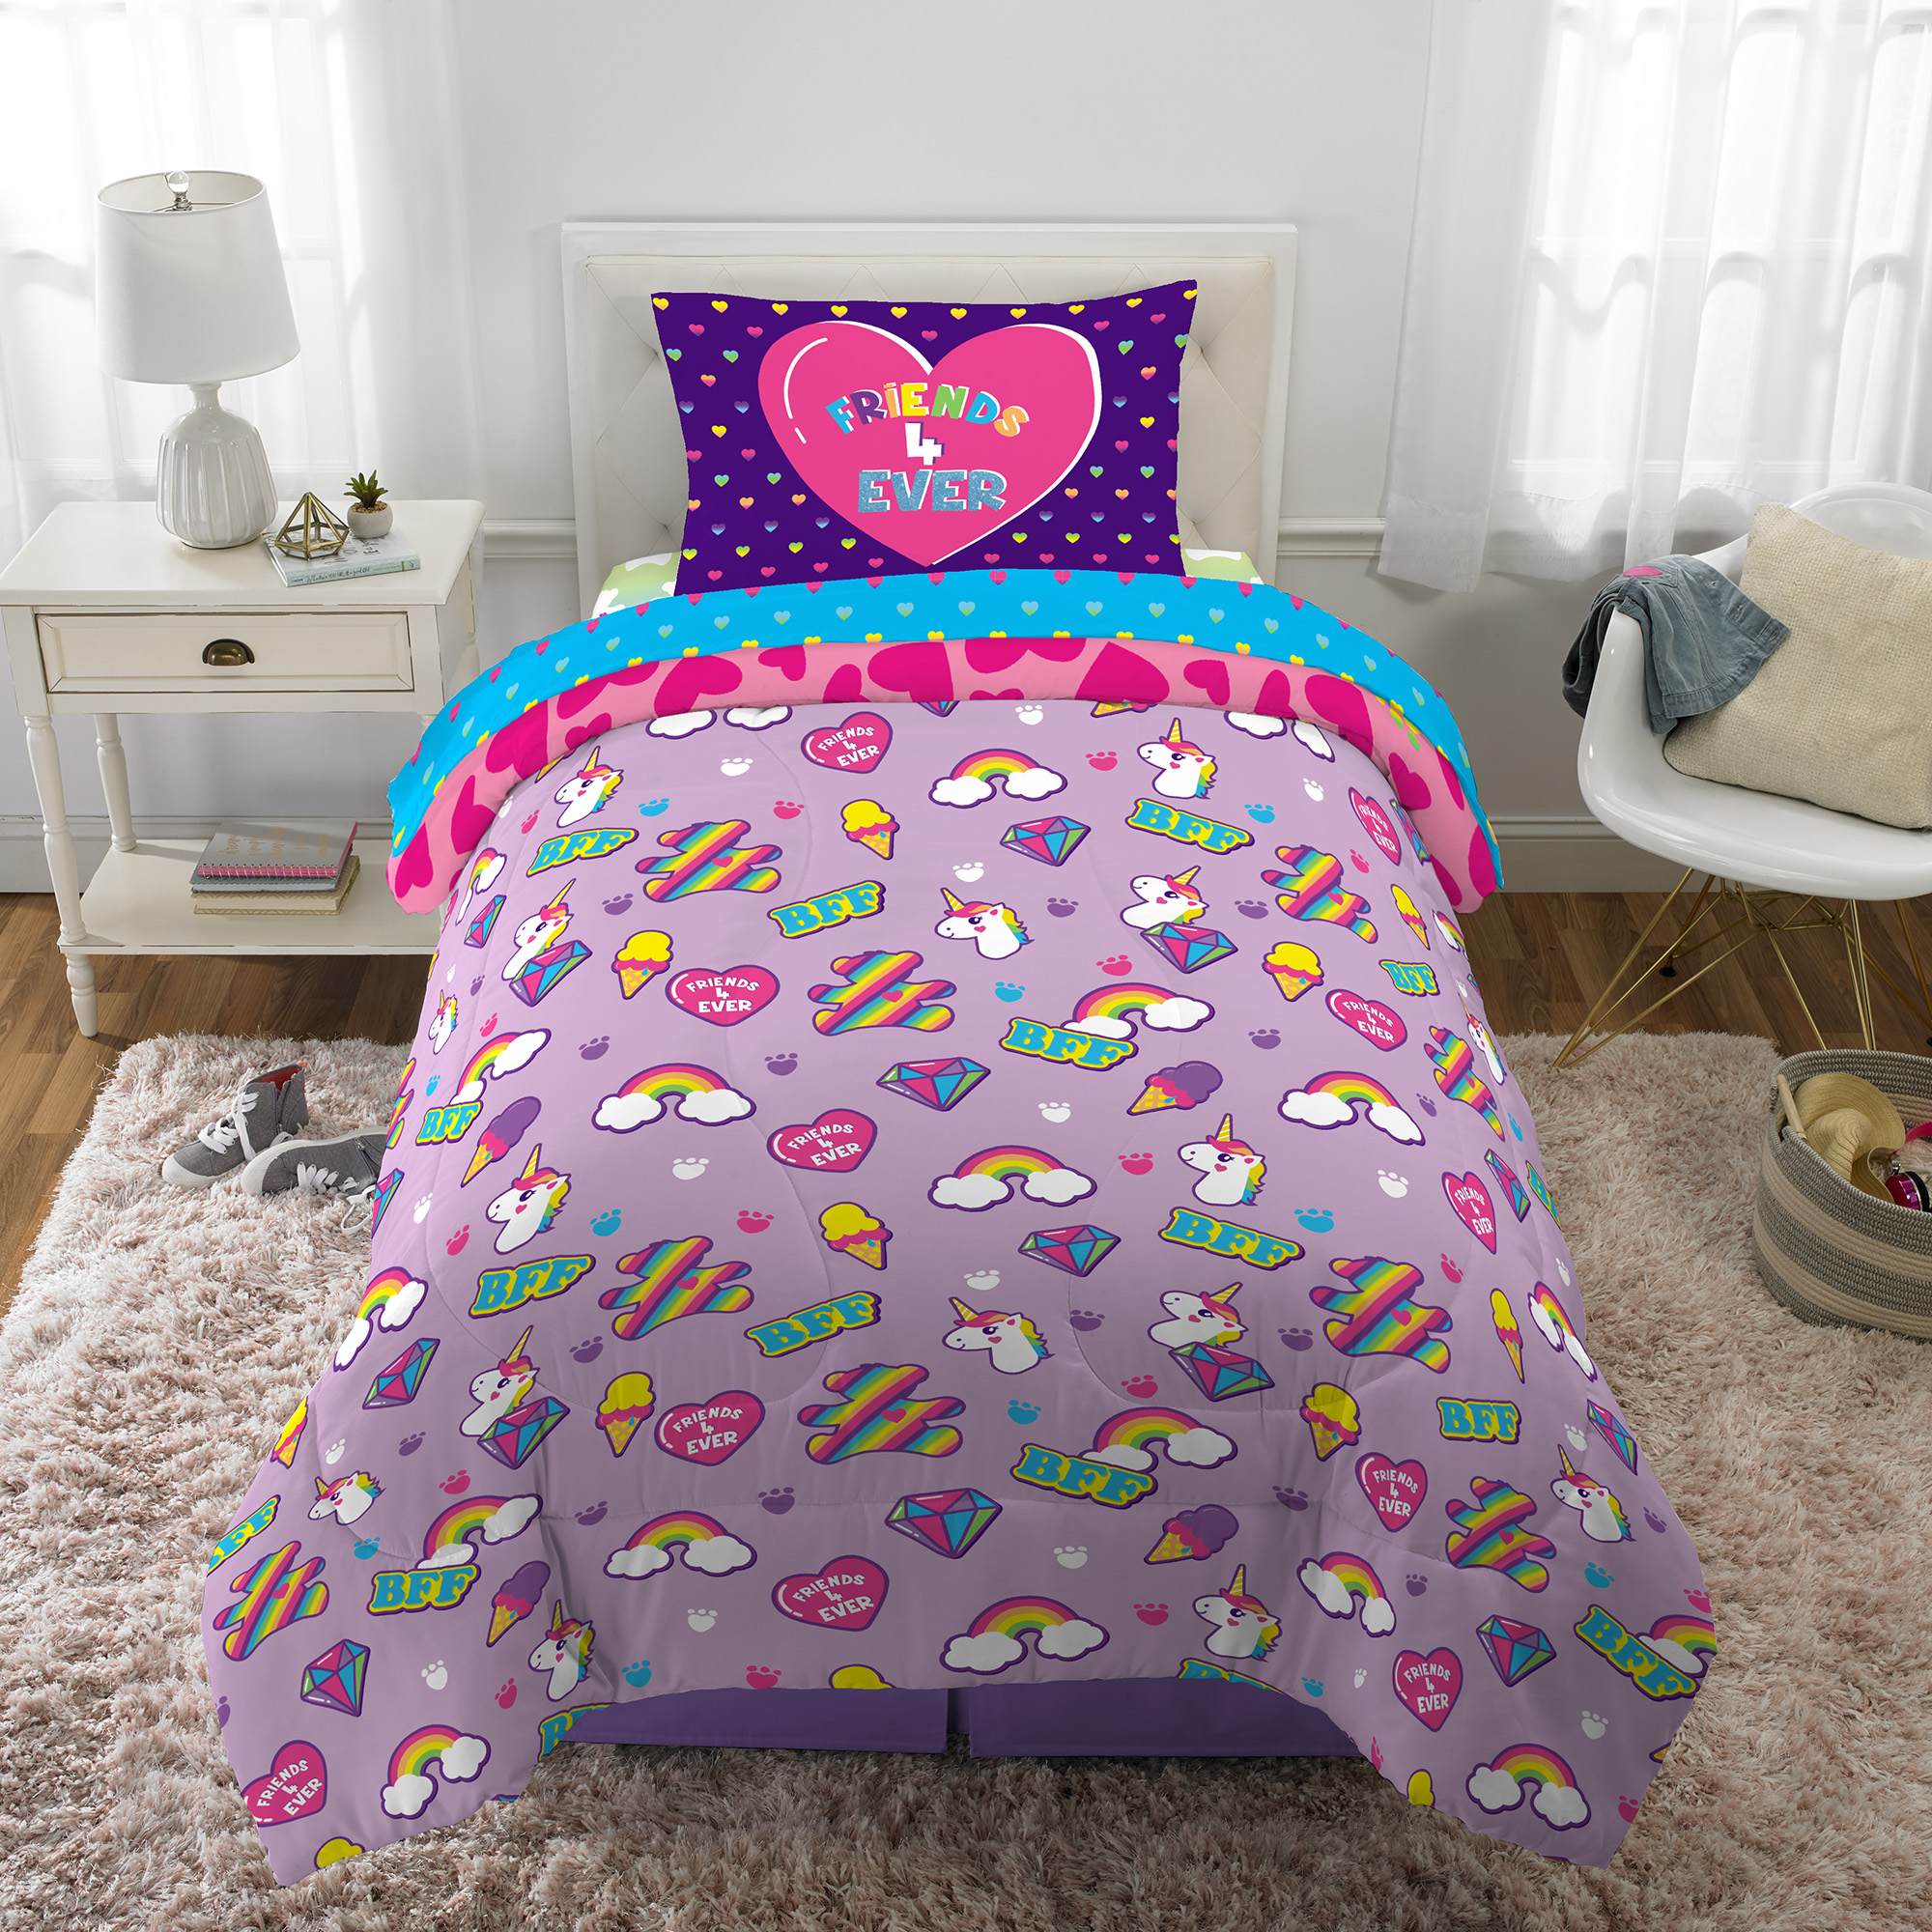 Build-A-Bear Workshop Kids Twin Bed in a Bag, Comforter and Sheets, Multicolor - image 3 of 10